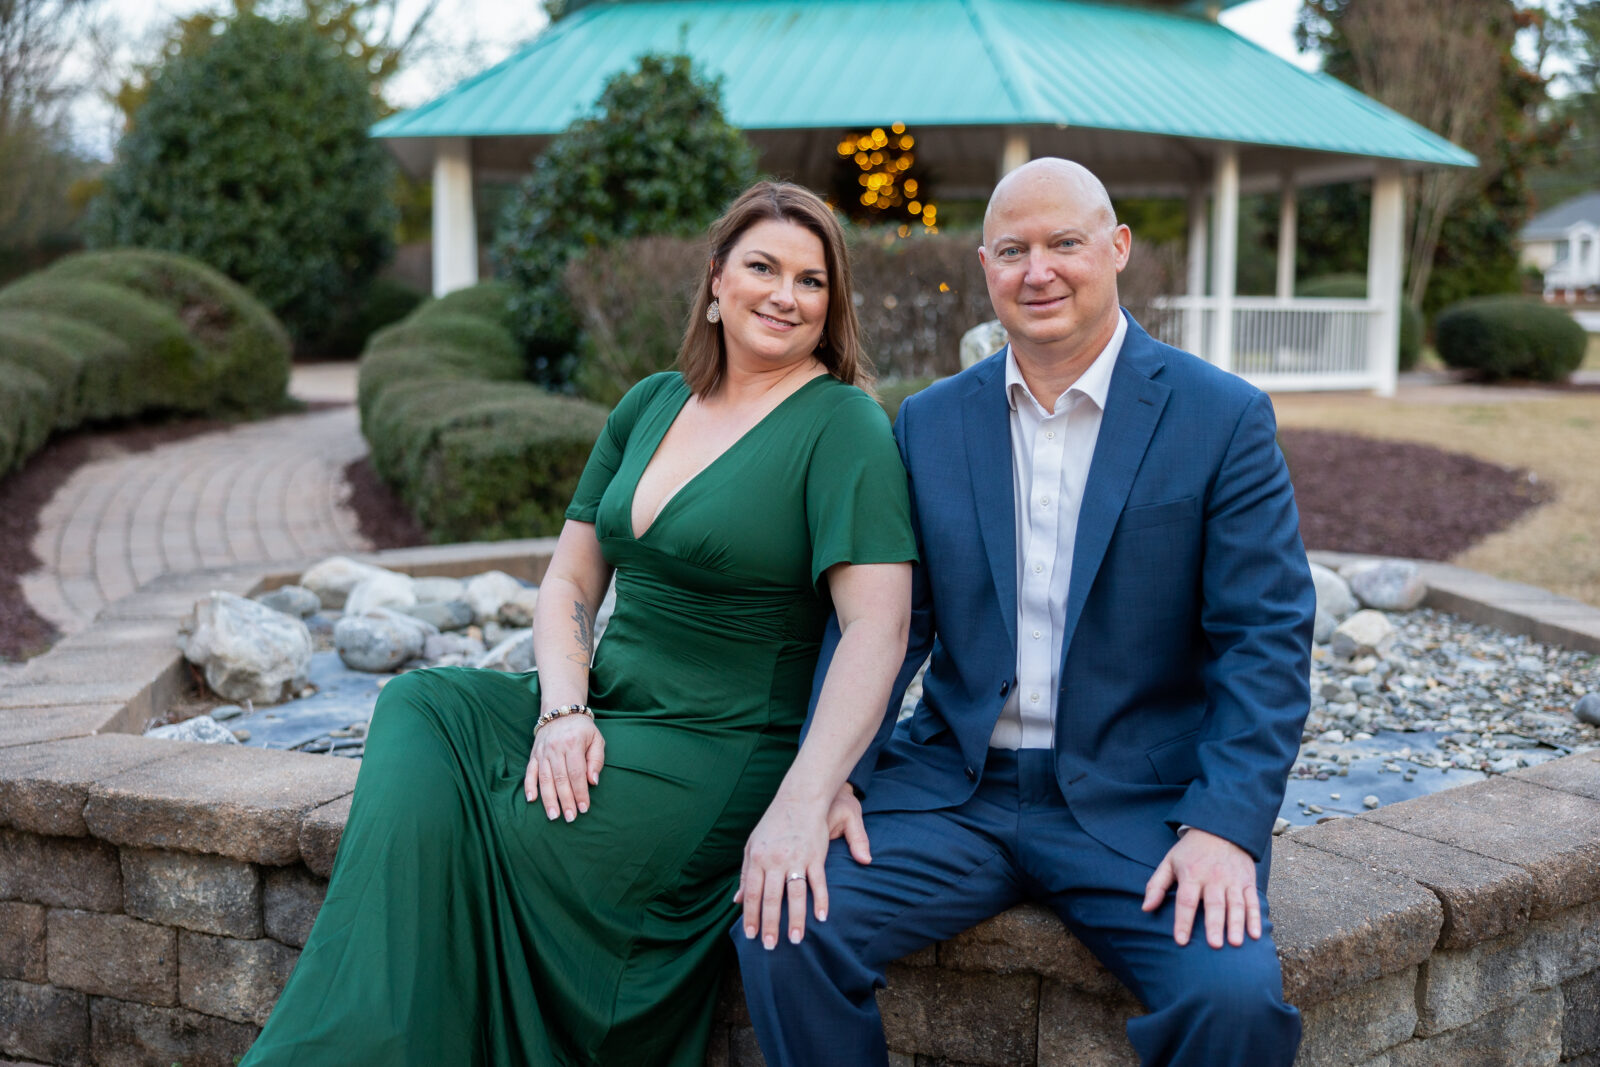 Woman in Green gown with a deep v neckline sitting next to a man with a Blue suit and white button down shirt in front of Rolesville park gazebo with Christmas lights